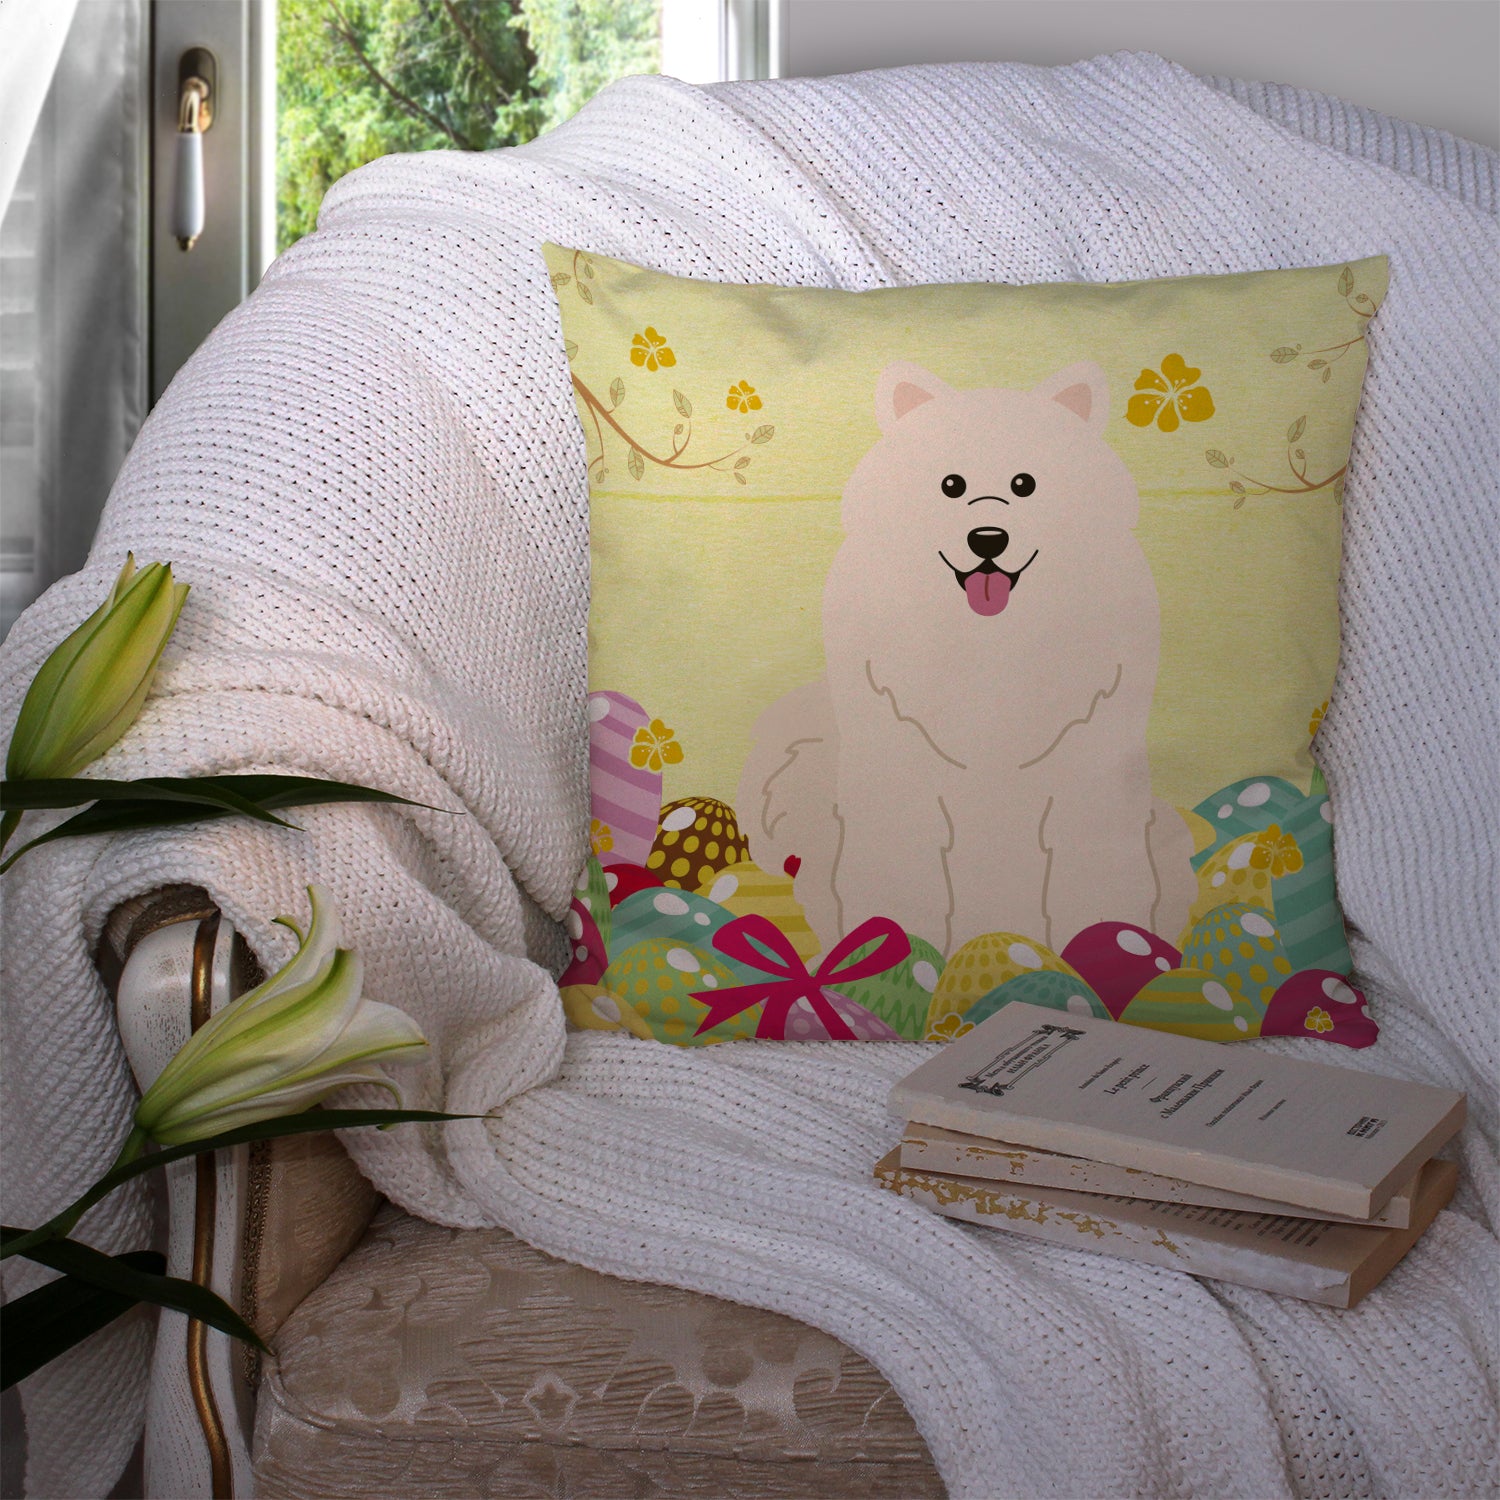 Easter Eggs Samoyed Fabric Decorative Pillow BB6030PW1414 - the-store.com